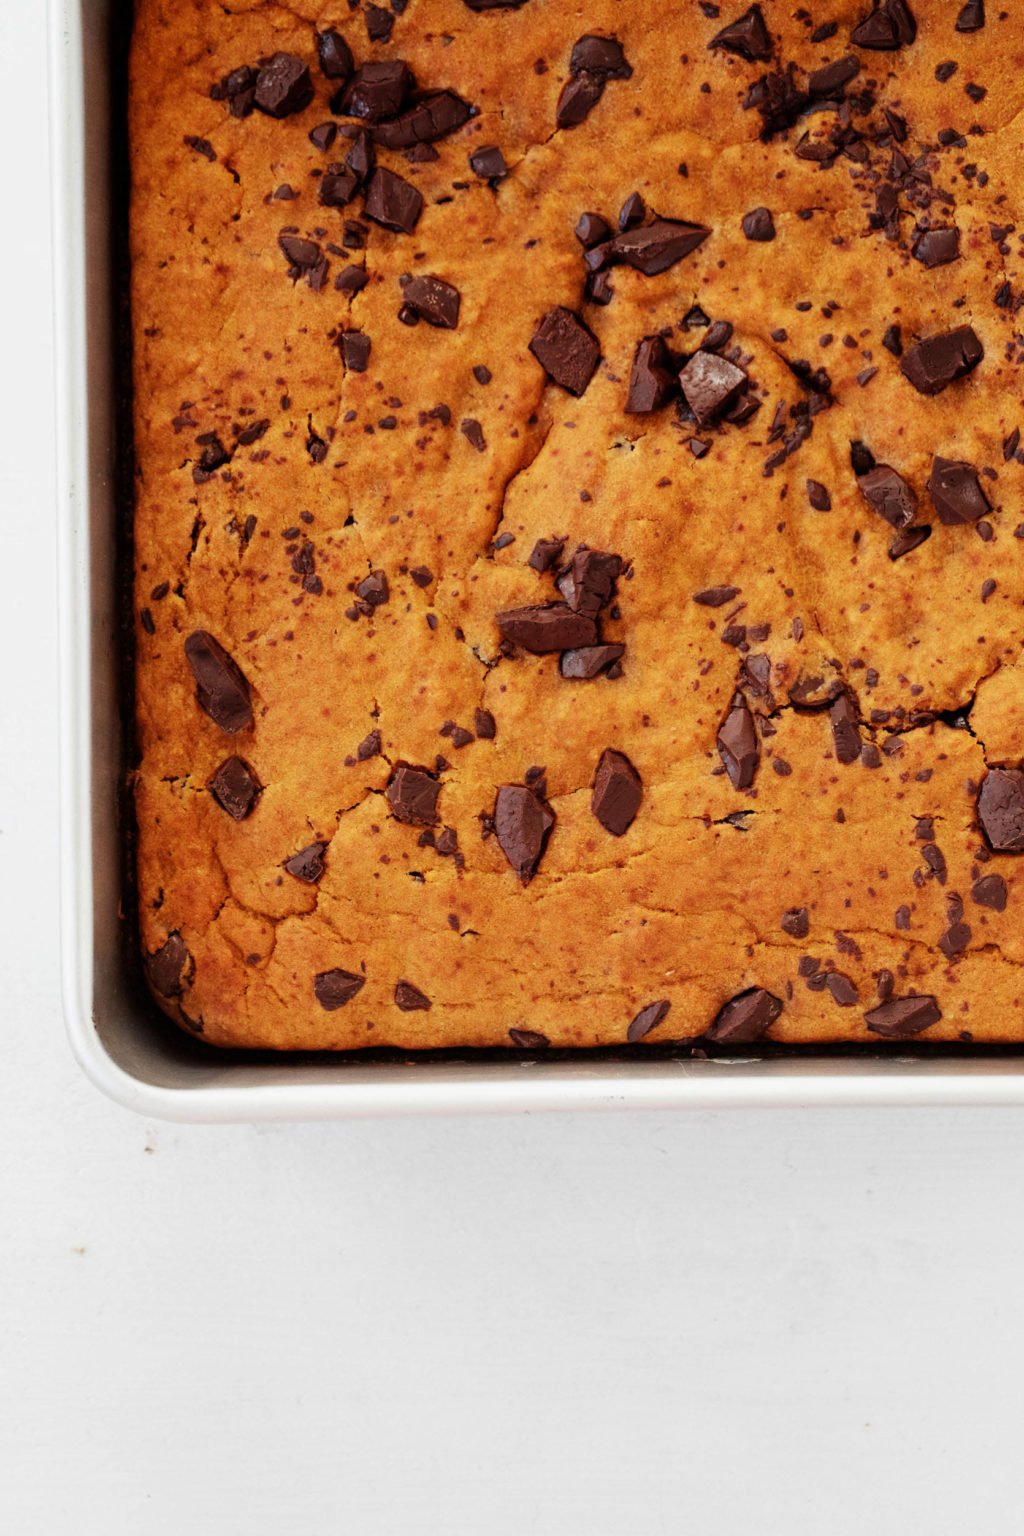 An aluminum baking dish is resting on a white surface. It's filled with a chocolate-studded, plant-based baked good.